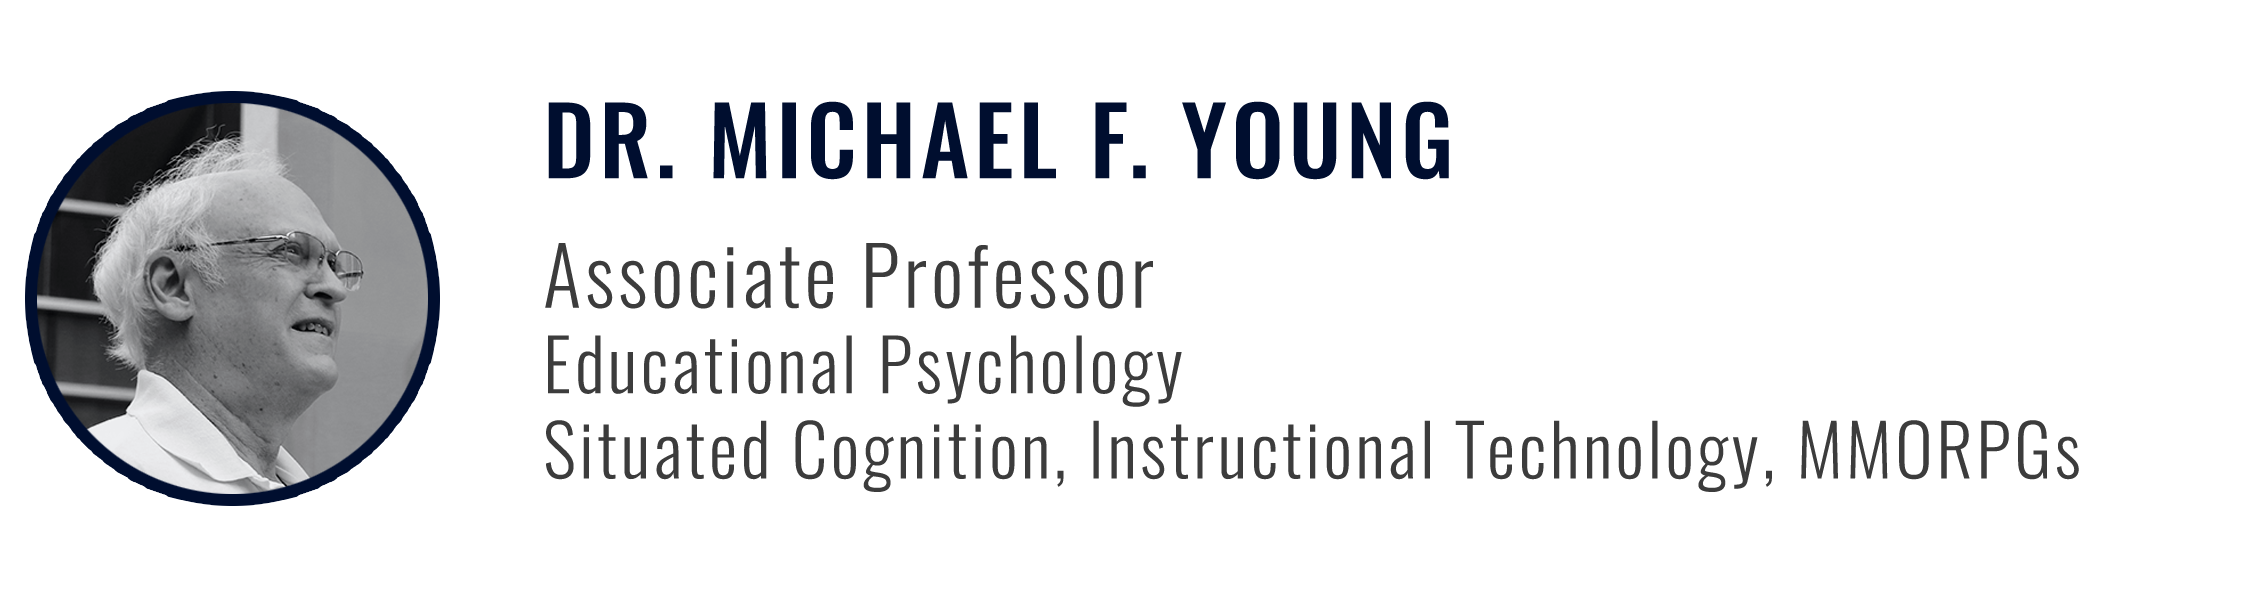 Dr. Michael F. Young, Asso. Prof. Educational Psychology